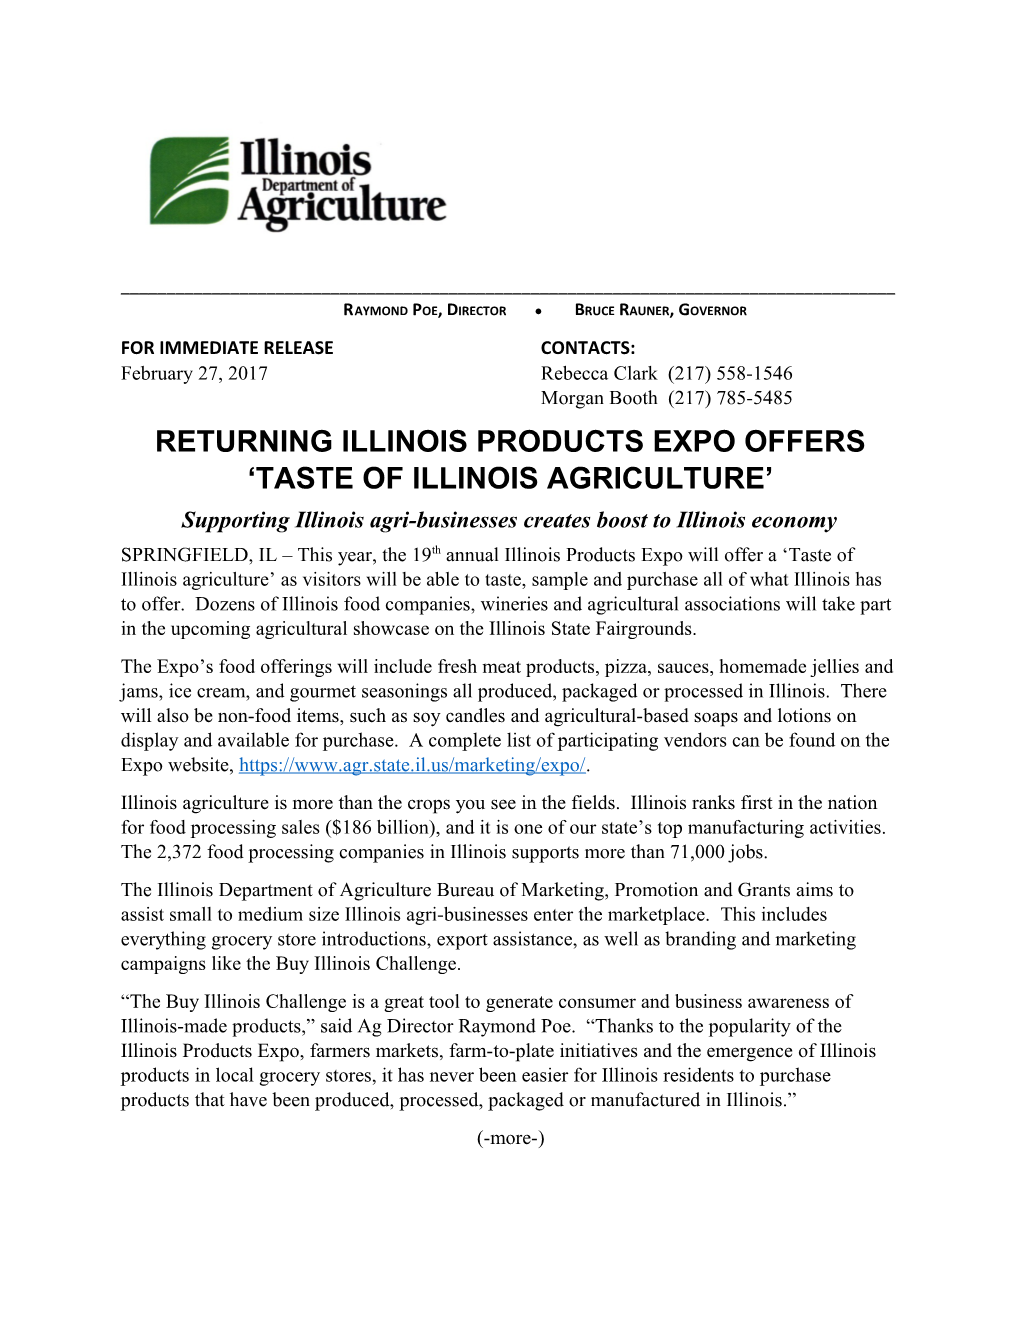 Returning Illinois Products Expo Offers Taste of Illinois Agriculture